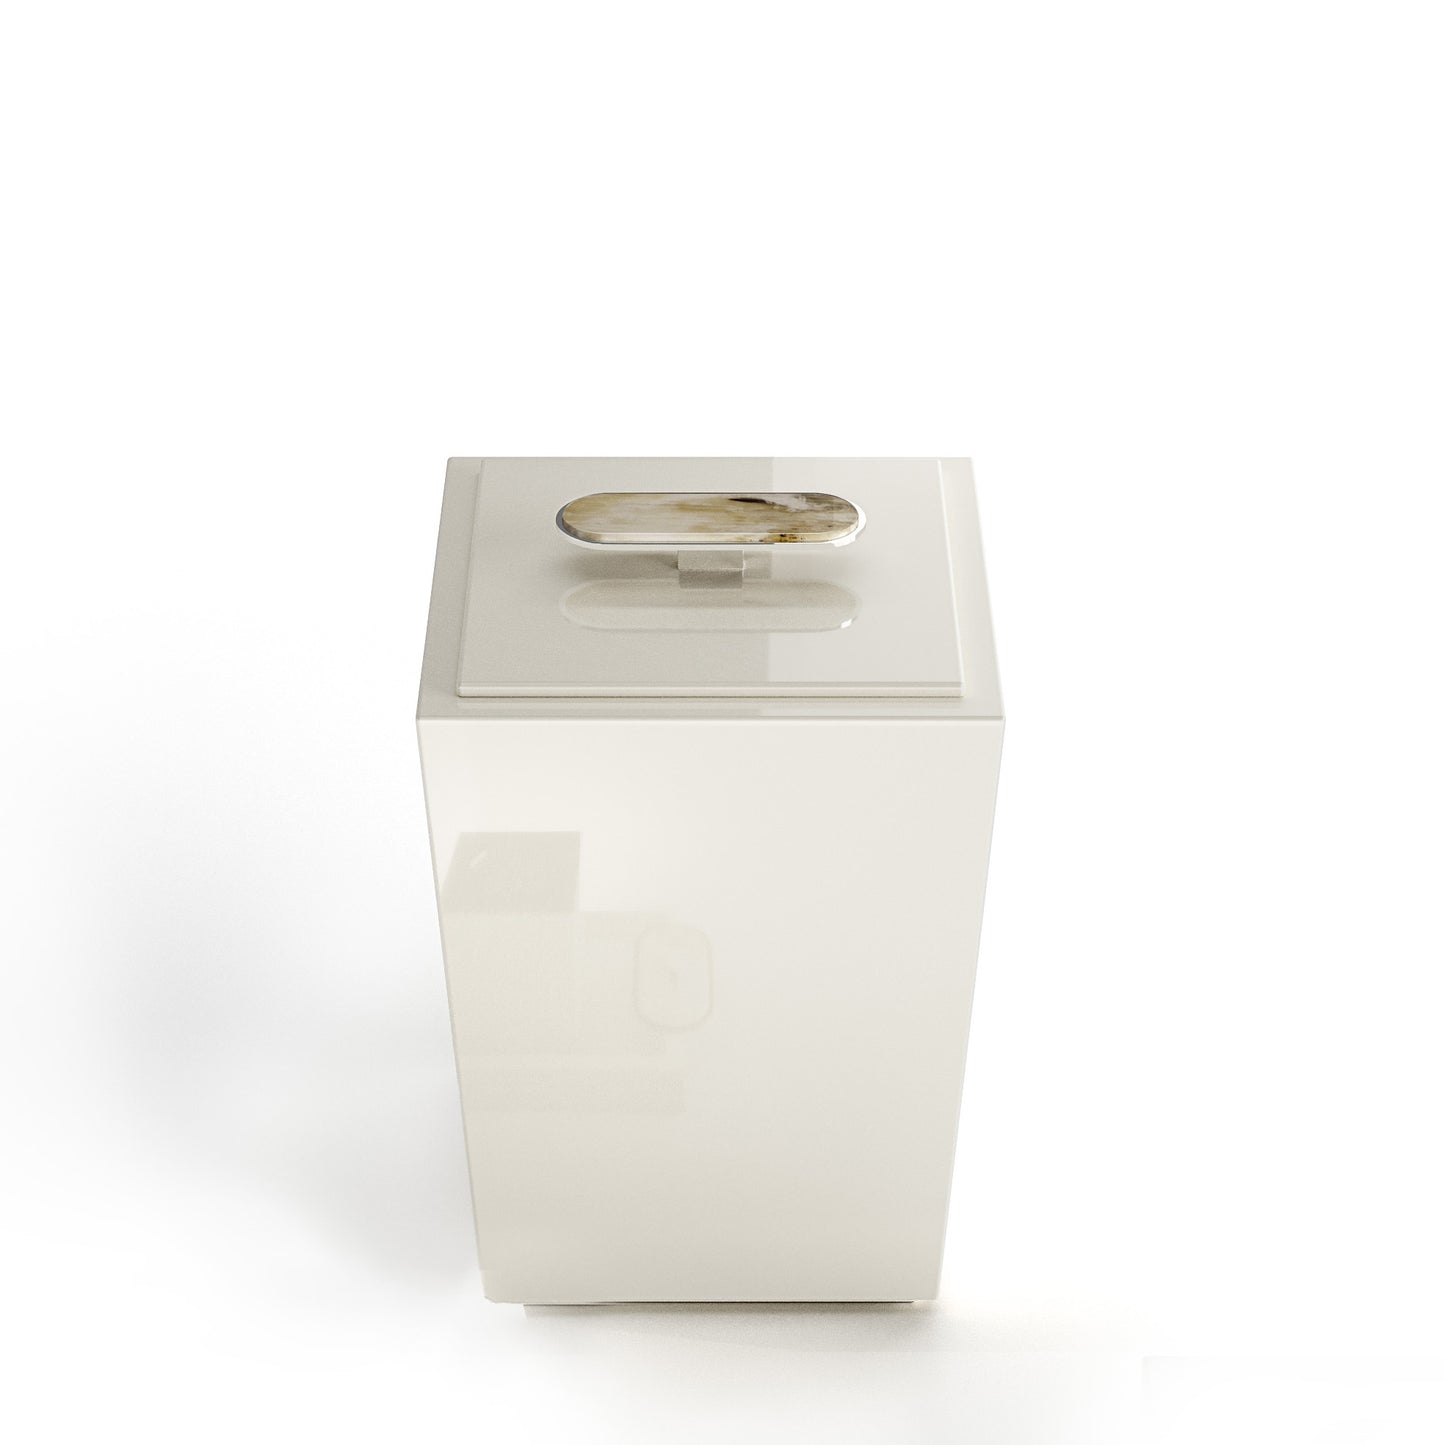 Arcahorn Bicco Waste Paper Basket | Lacquered Ivory Gloss Finish | Horn Handle and Chromed Brass Lid | Ideal for Yacht Decor | Explore Luxury Home Accessories at 2Jour Concierge, #1 luxury high-end gift & lifestyle shop